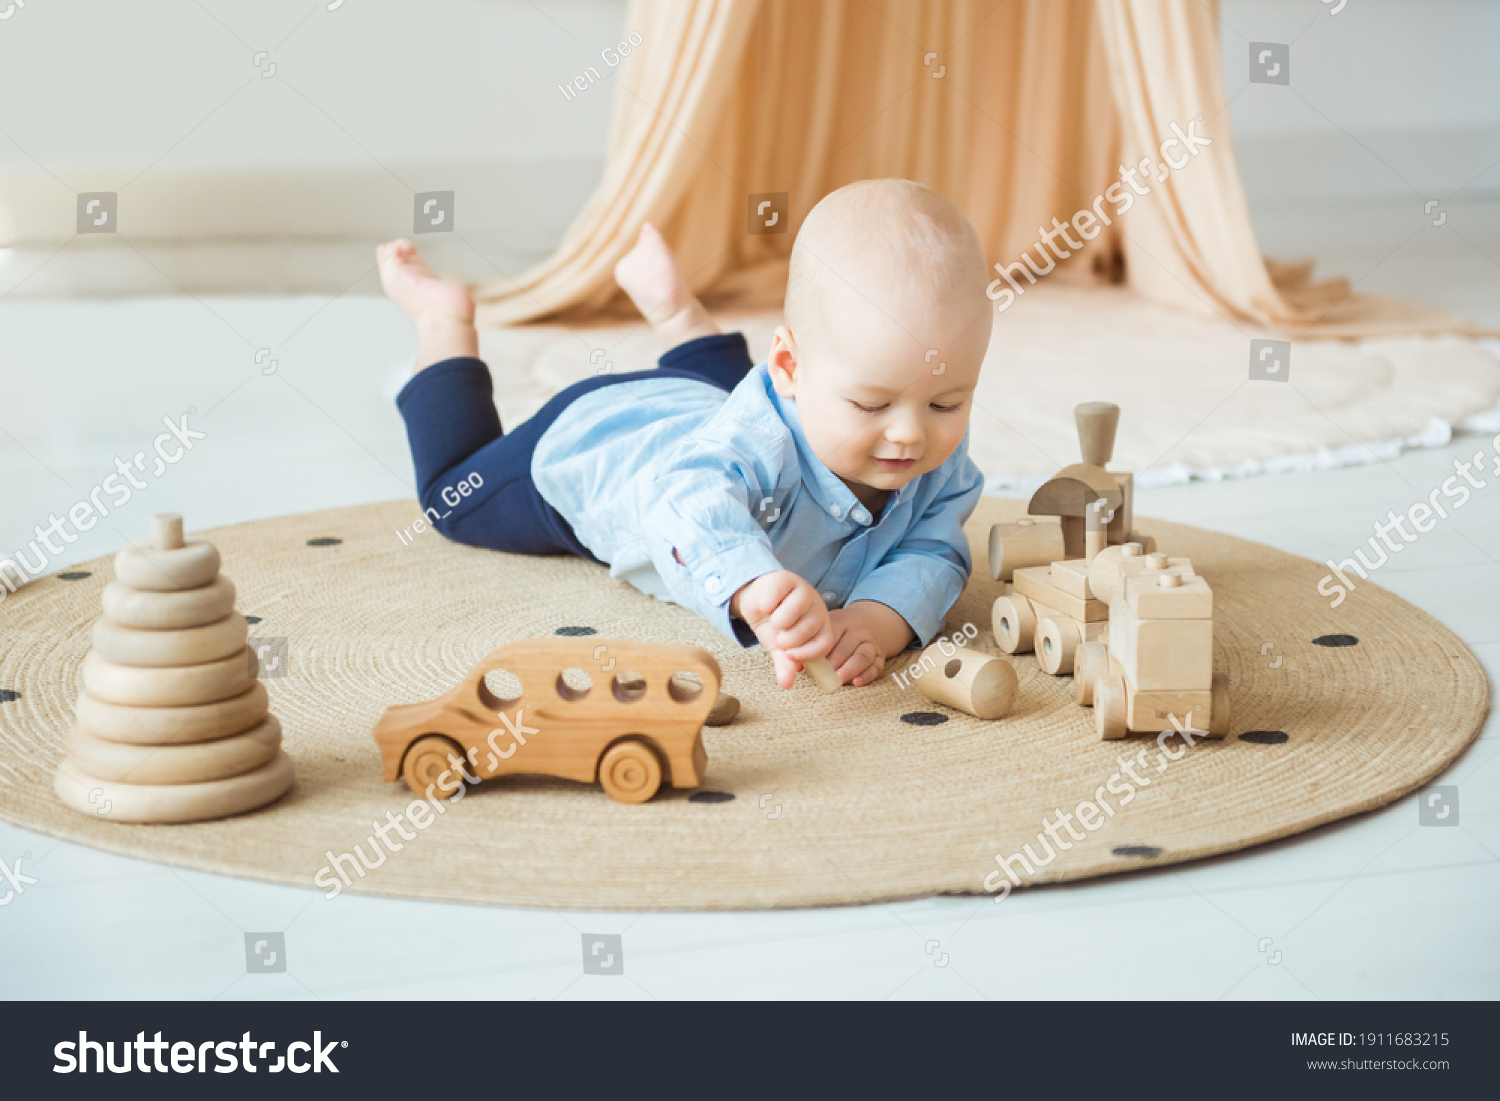 Baby playing with wooden toys. Eco-friendly wooden toys for children #1911683215